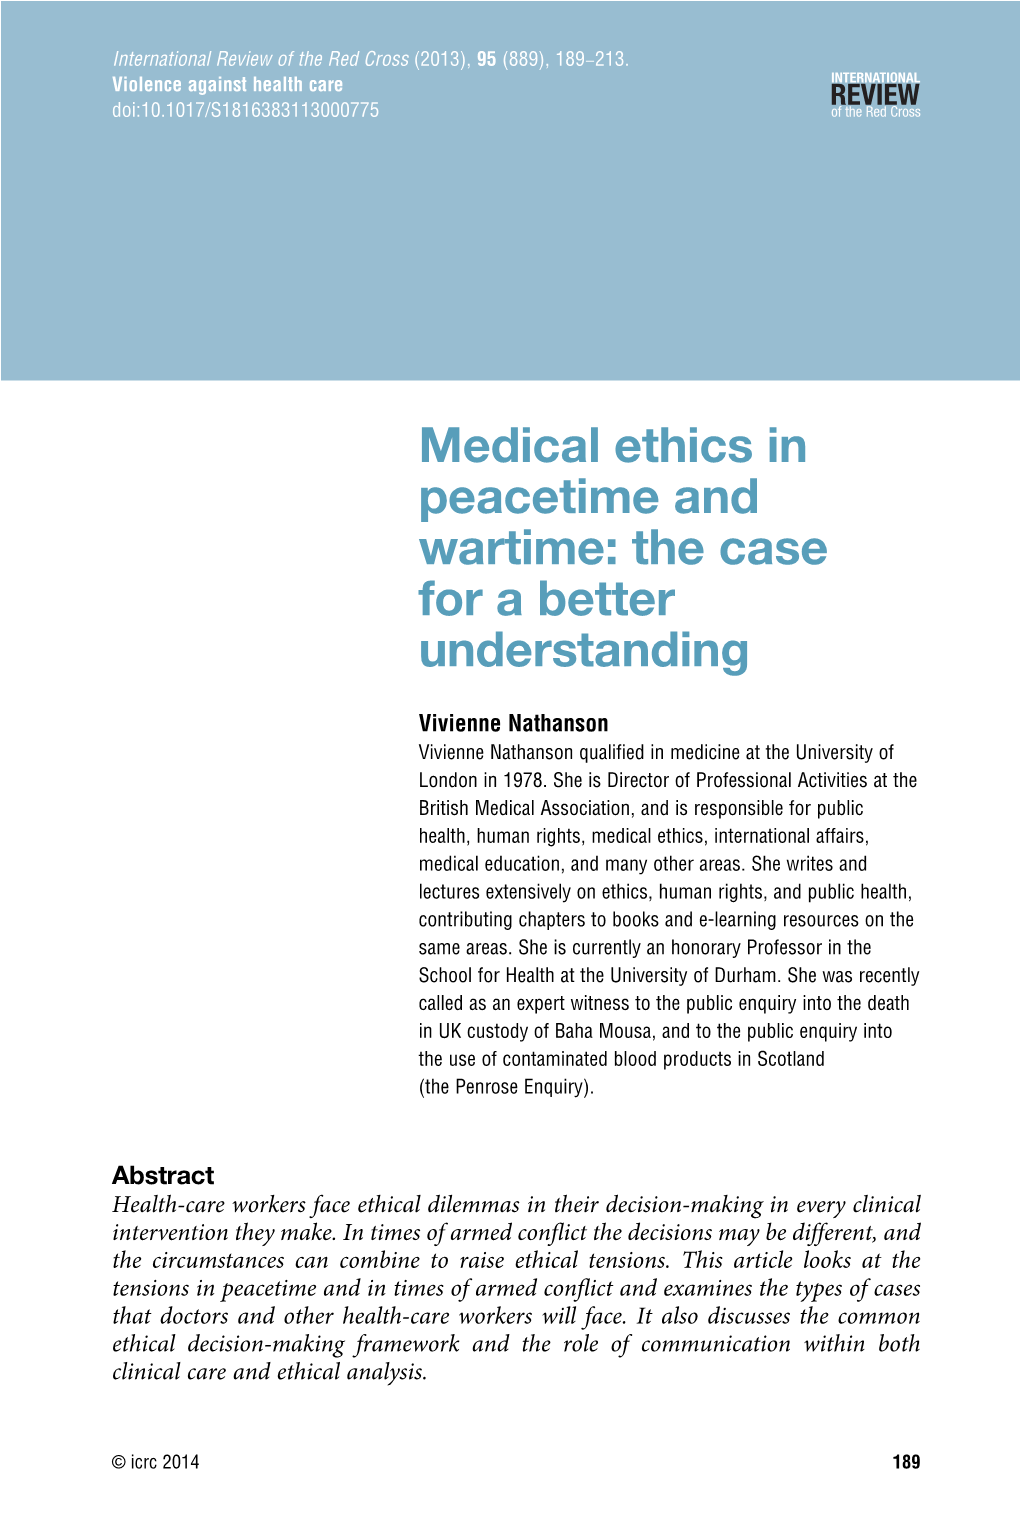 Medical Ethics in Peacetime and Wartime: the Case for a Better Understanding